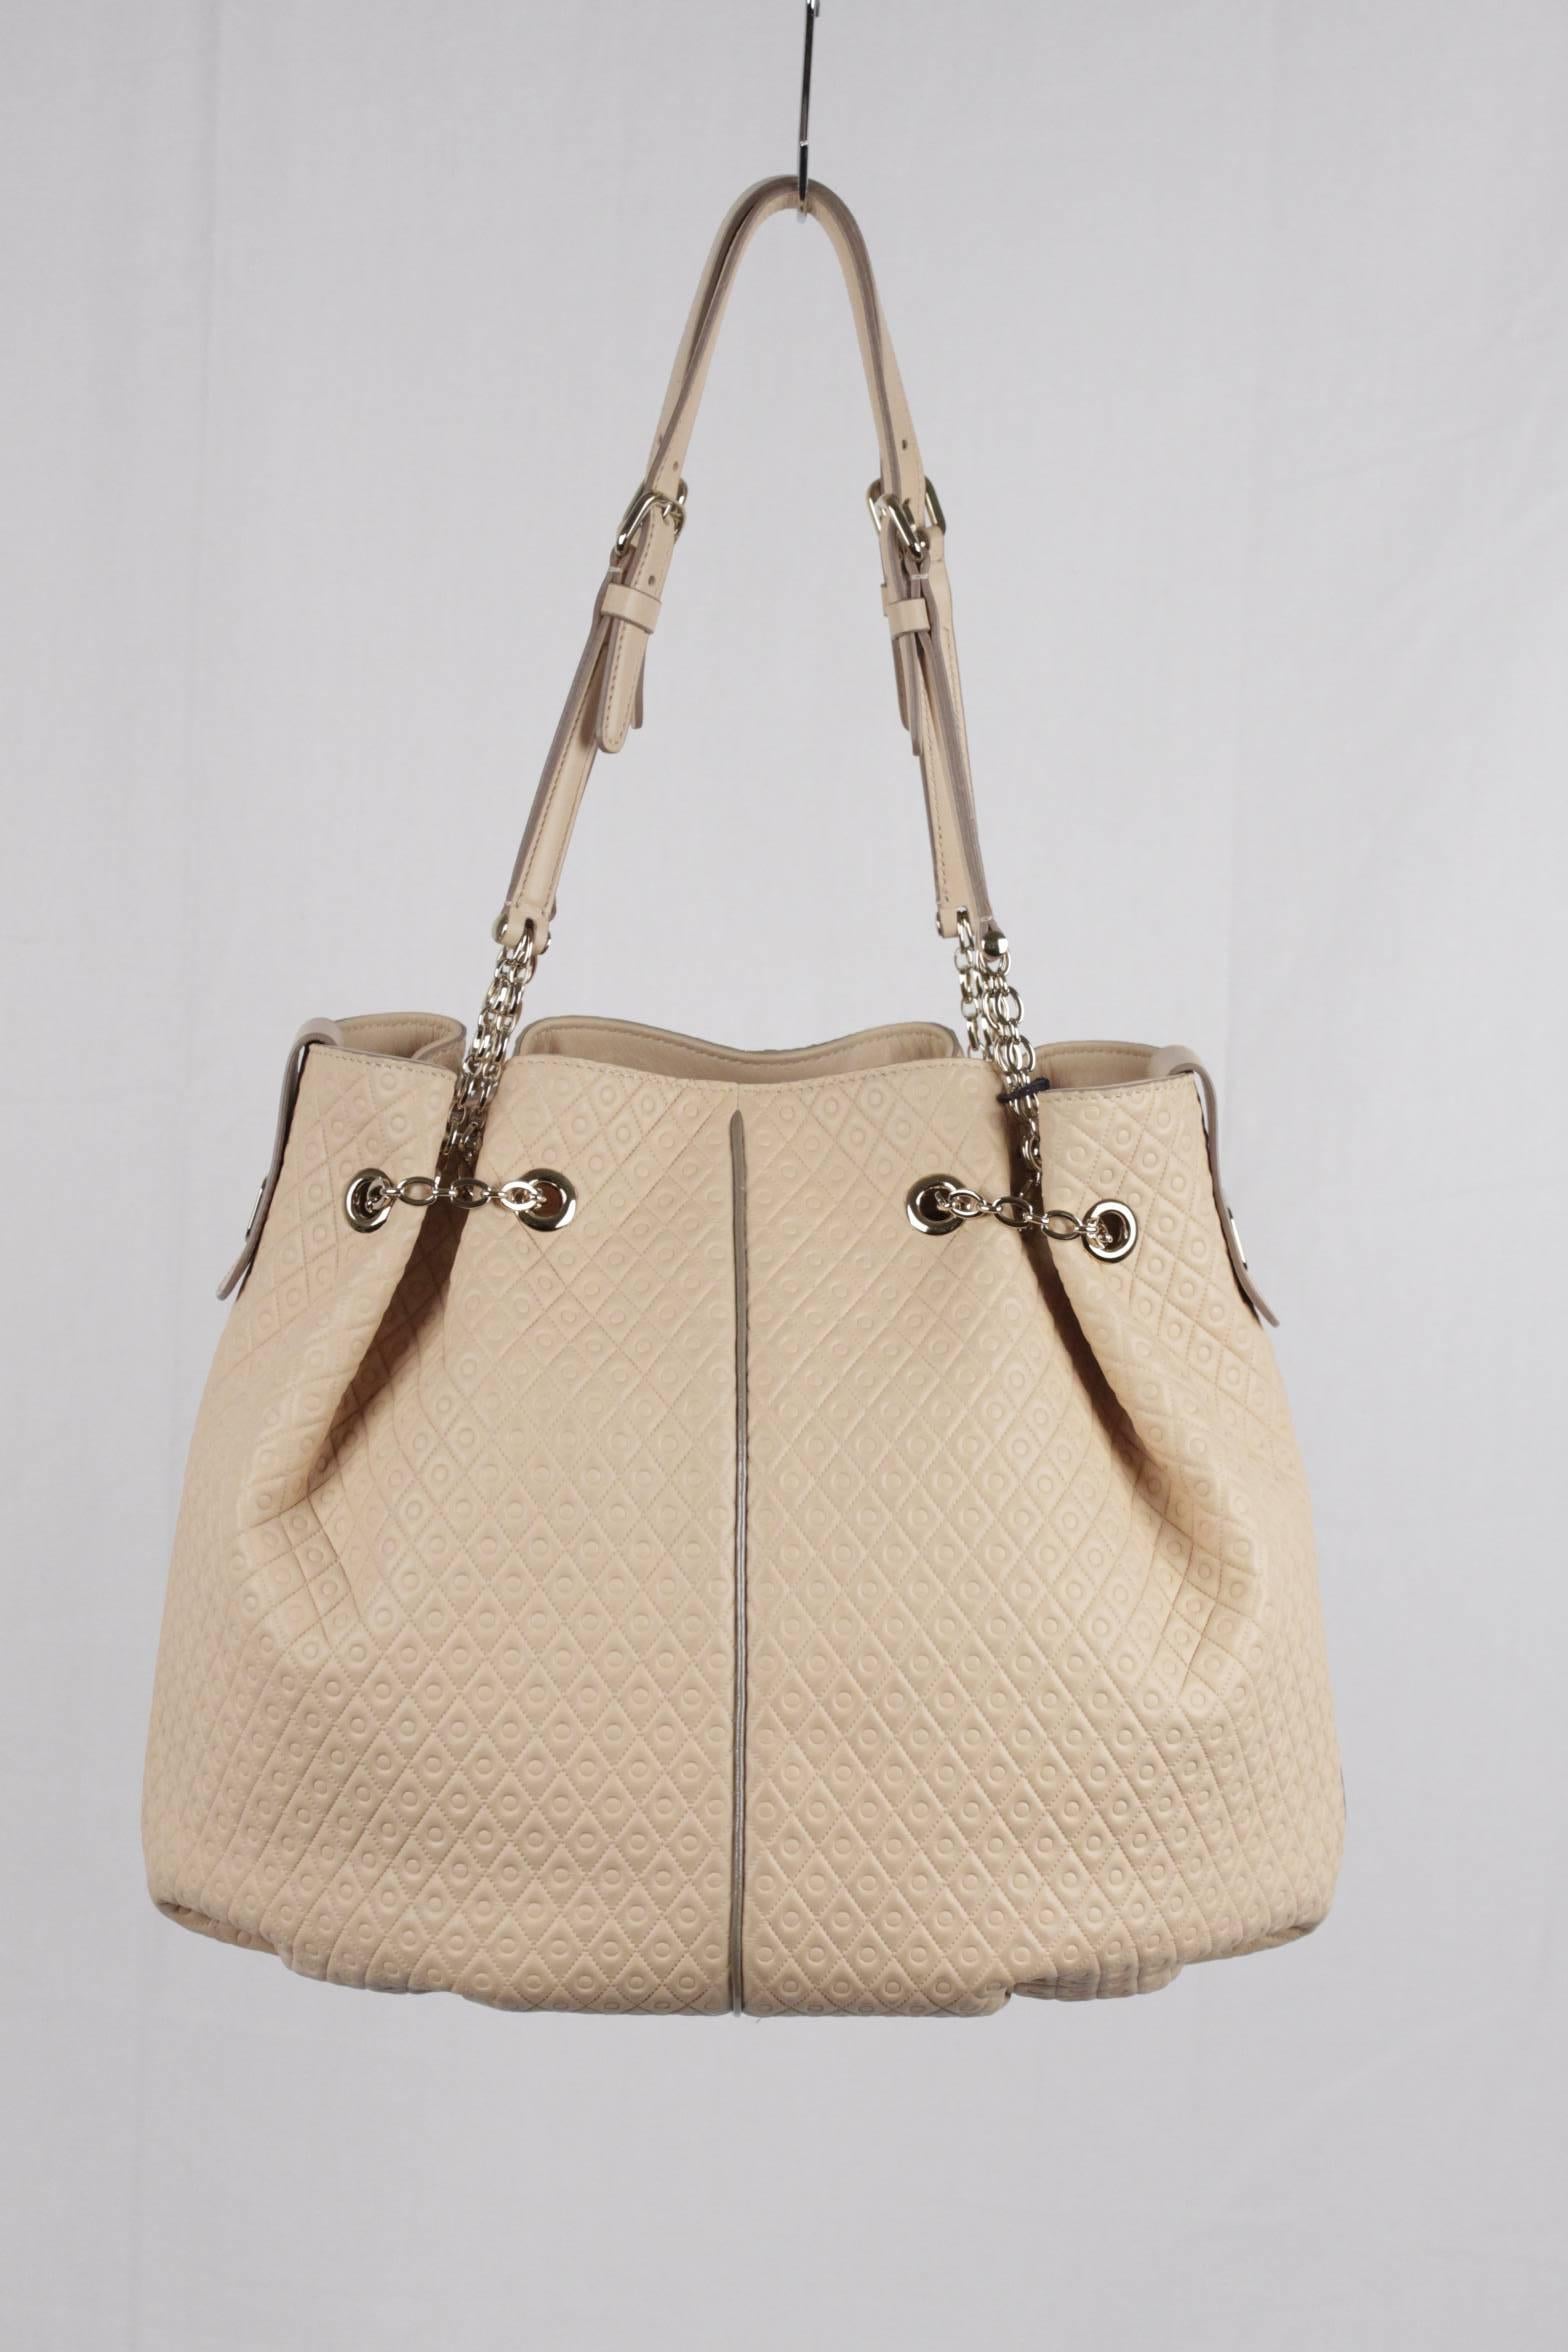  - TOD'S beige leather bucket shopper tote shoulder bag
- Hand stitching
- Embossed pattern
- Gold metal hardware
- 1 interior zip pocket
- Open top with engraved snap tab closure
- Dual straps
- Protective feet
- TOD'S name plate
- Reatil